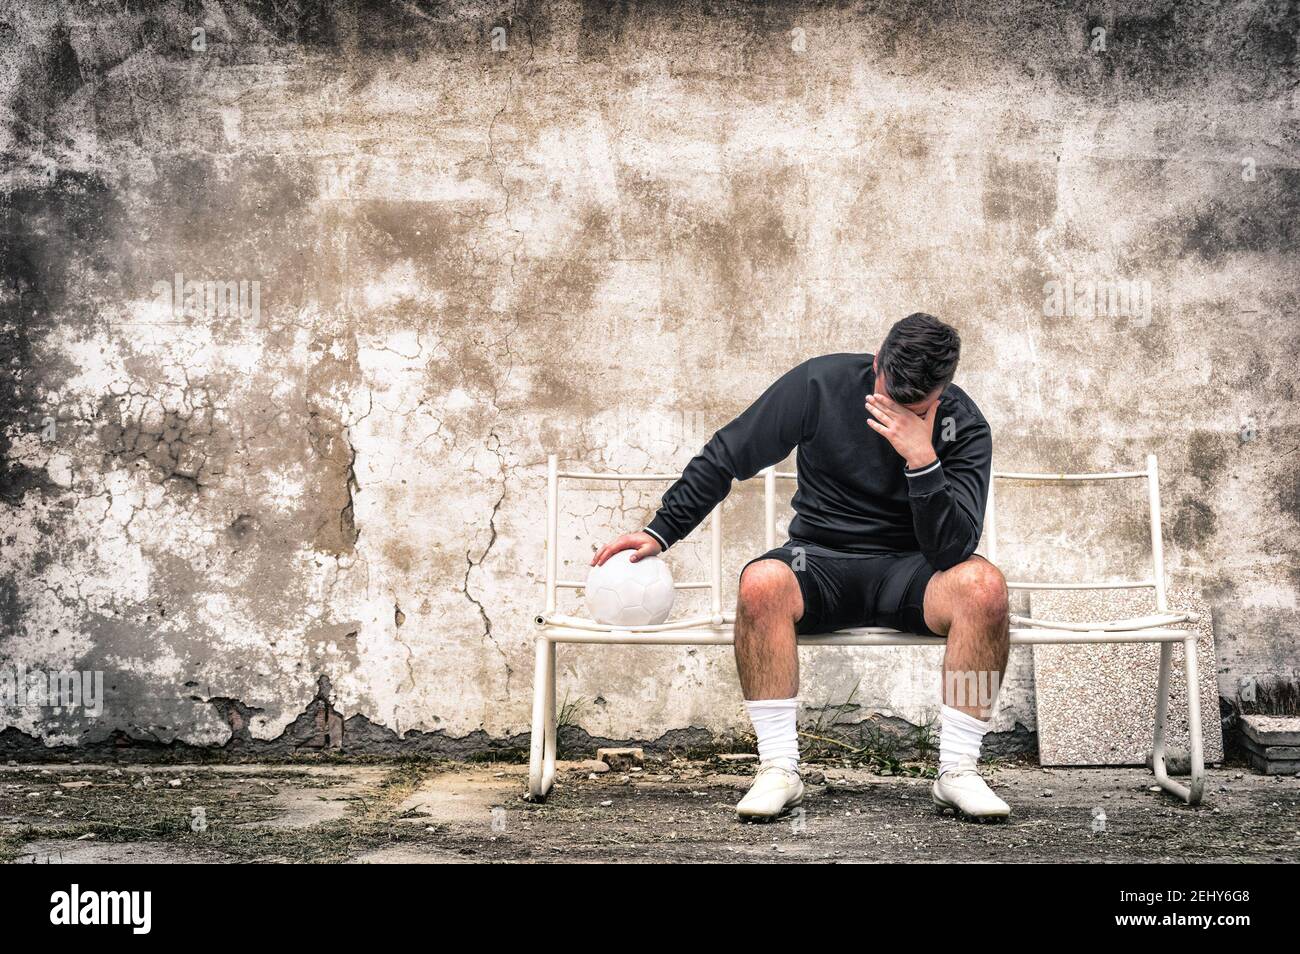 Soccer football goalkeeper feeling desperate after sport failure - Concept of guilt related to negative doping experience Stock Photo